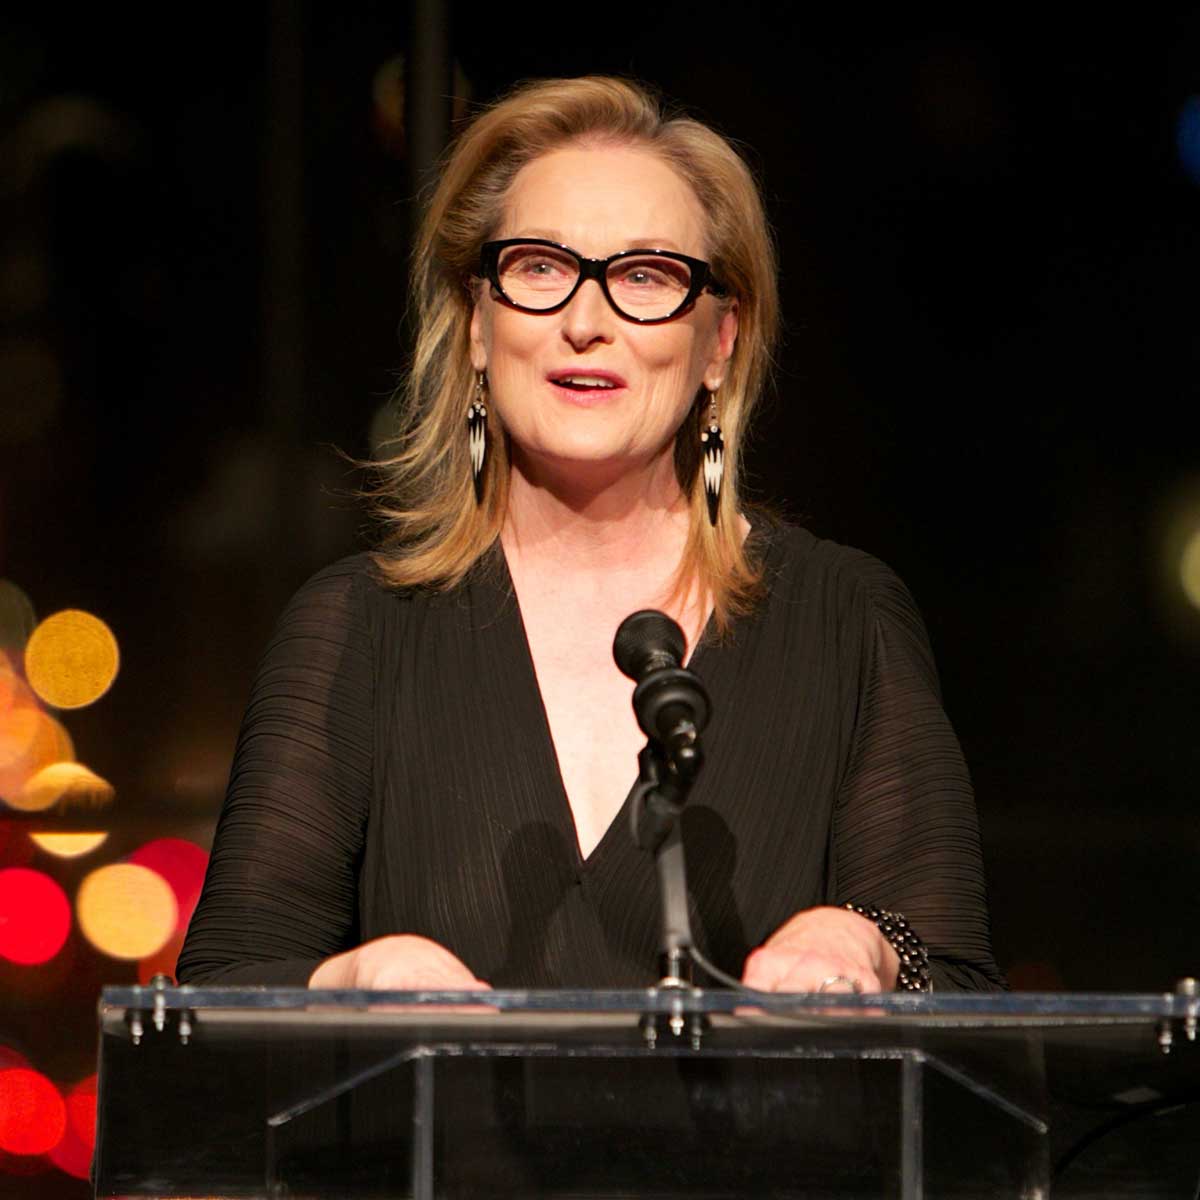 Meryl Streep addressing an audience off stage